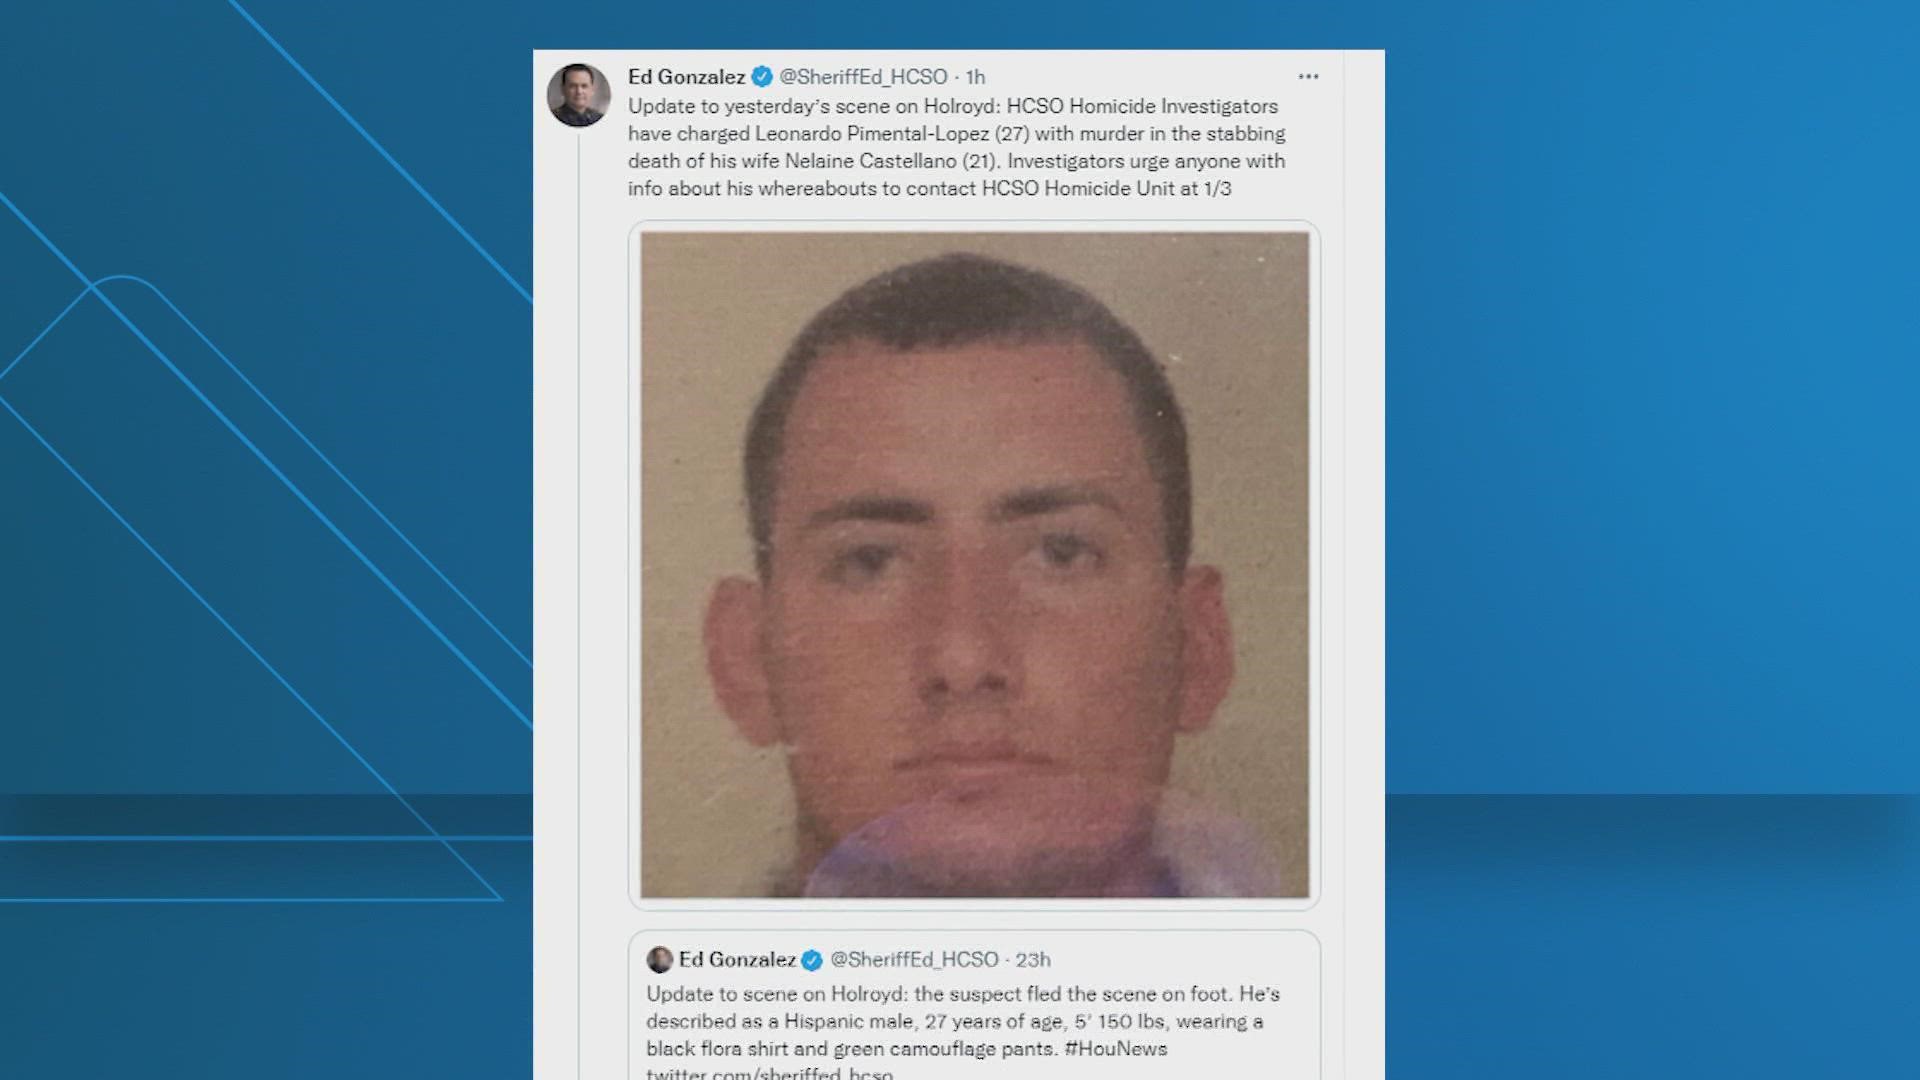 Deputies are looking for Leonardo Pimental-Lopez, 27, and have released his photo. His wife has been identified as 21-year-old Nelaine Castellano.